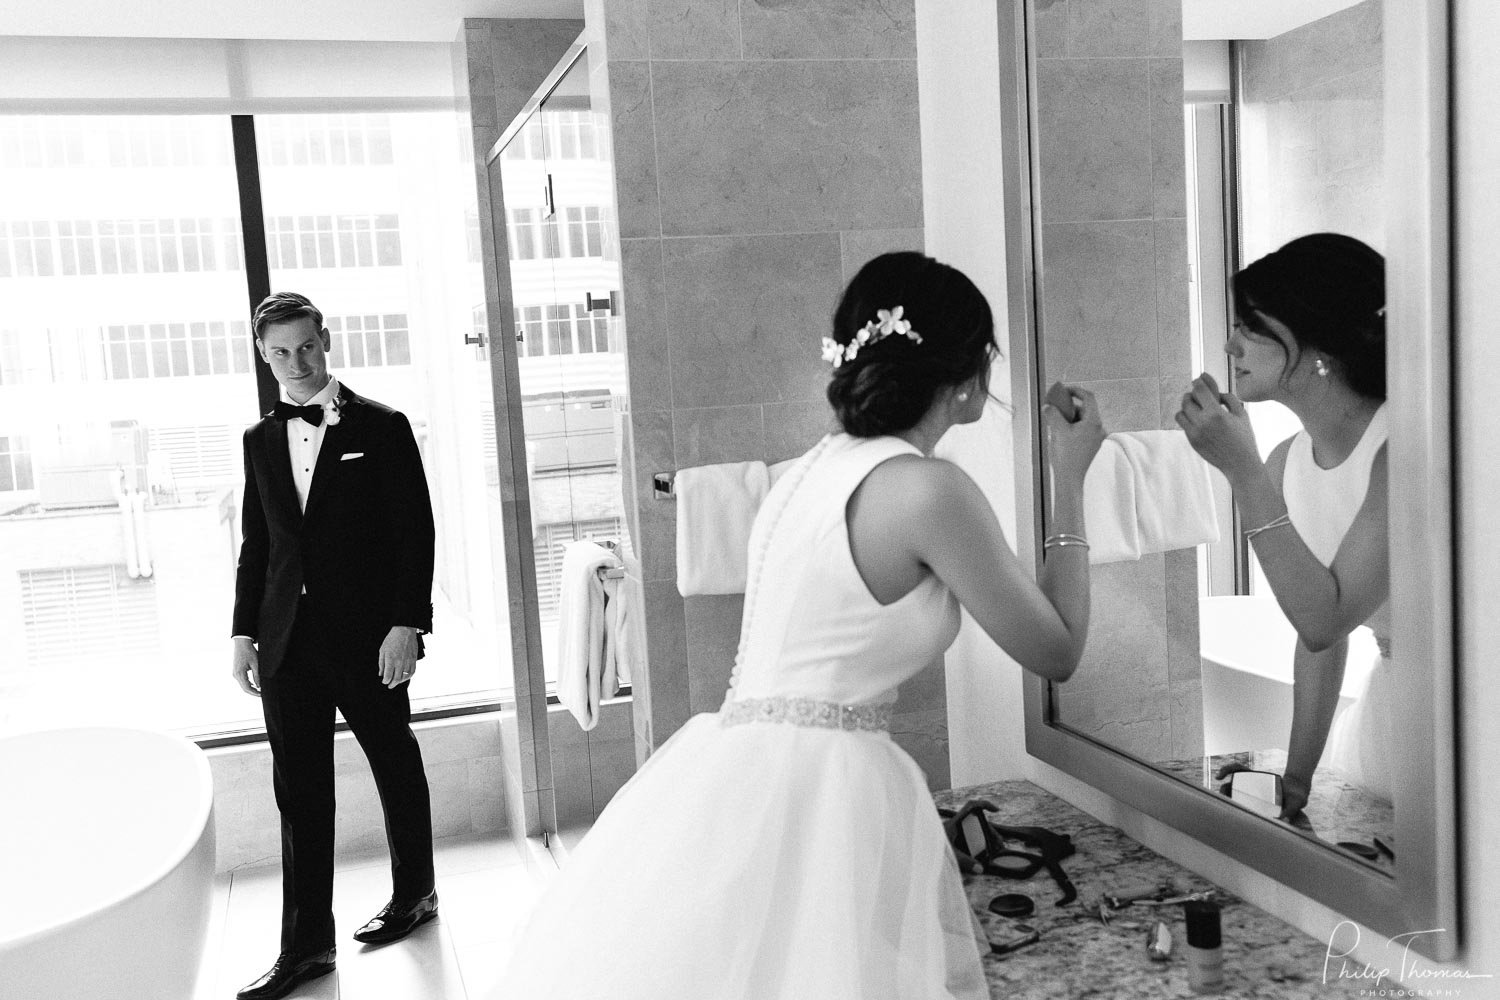 A newly married couple enjoy a break in-between the ceremony and cocktail party at the JW downtown Houston, Texas. Intermission